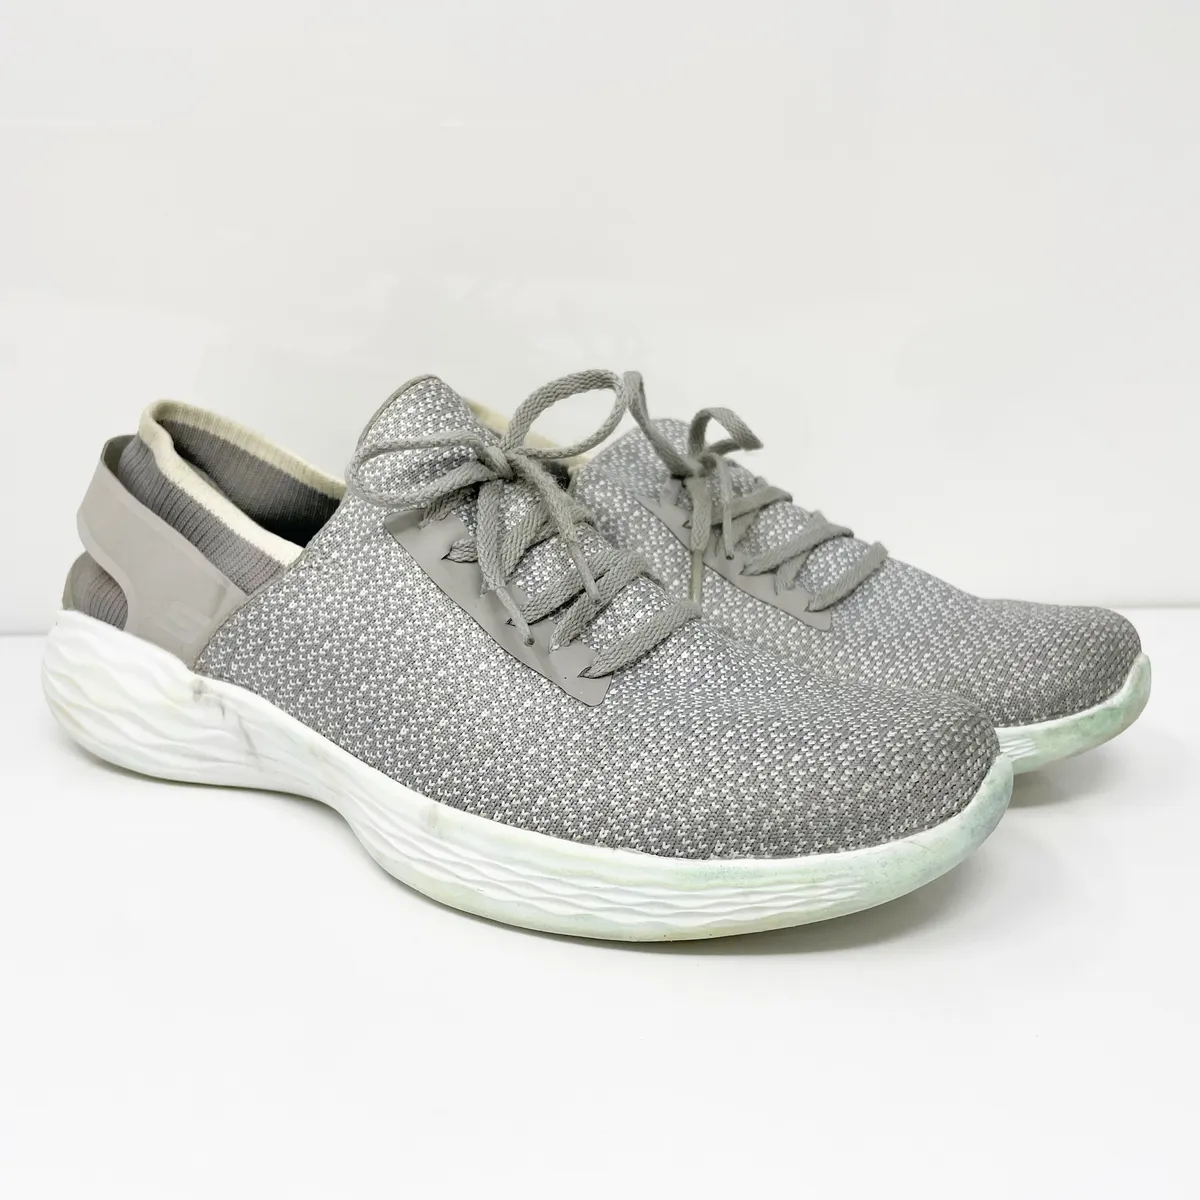 Skechers Womens 14950 Gray Shoes Sneakers Size 8 |